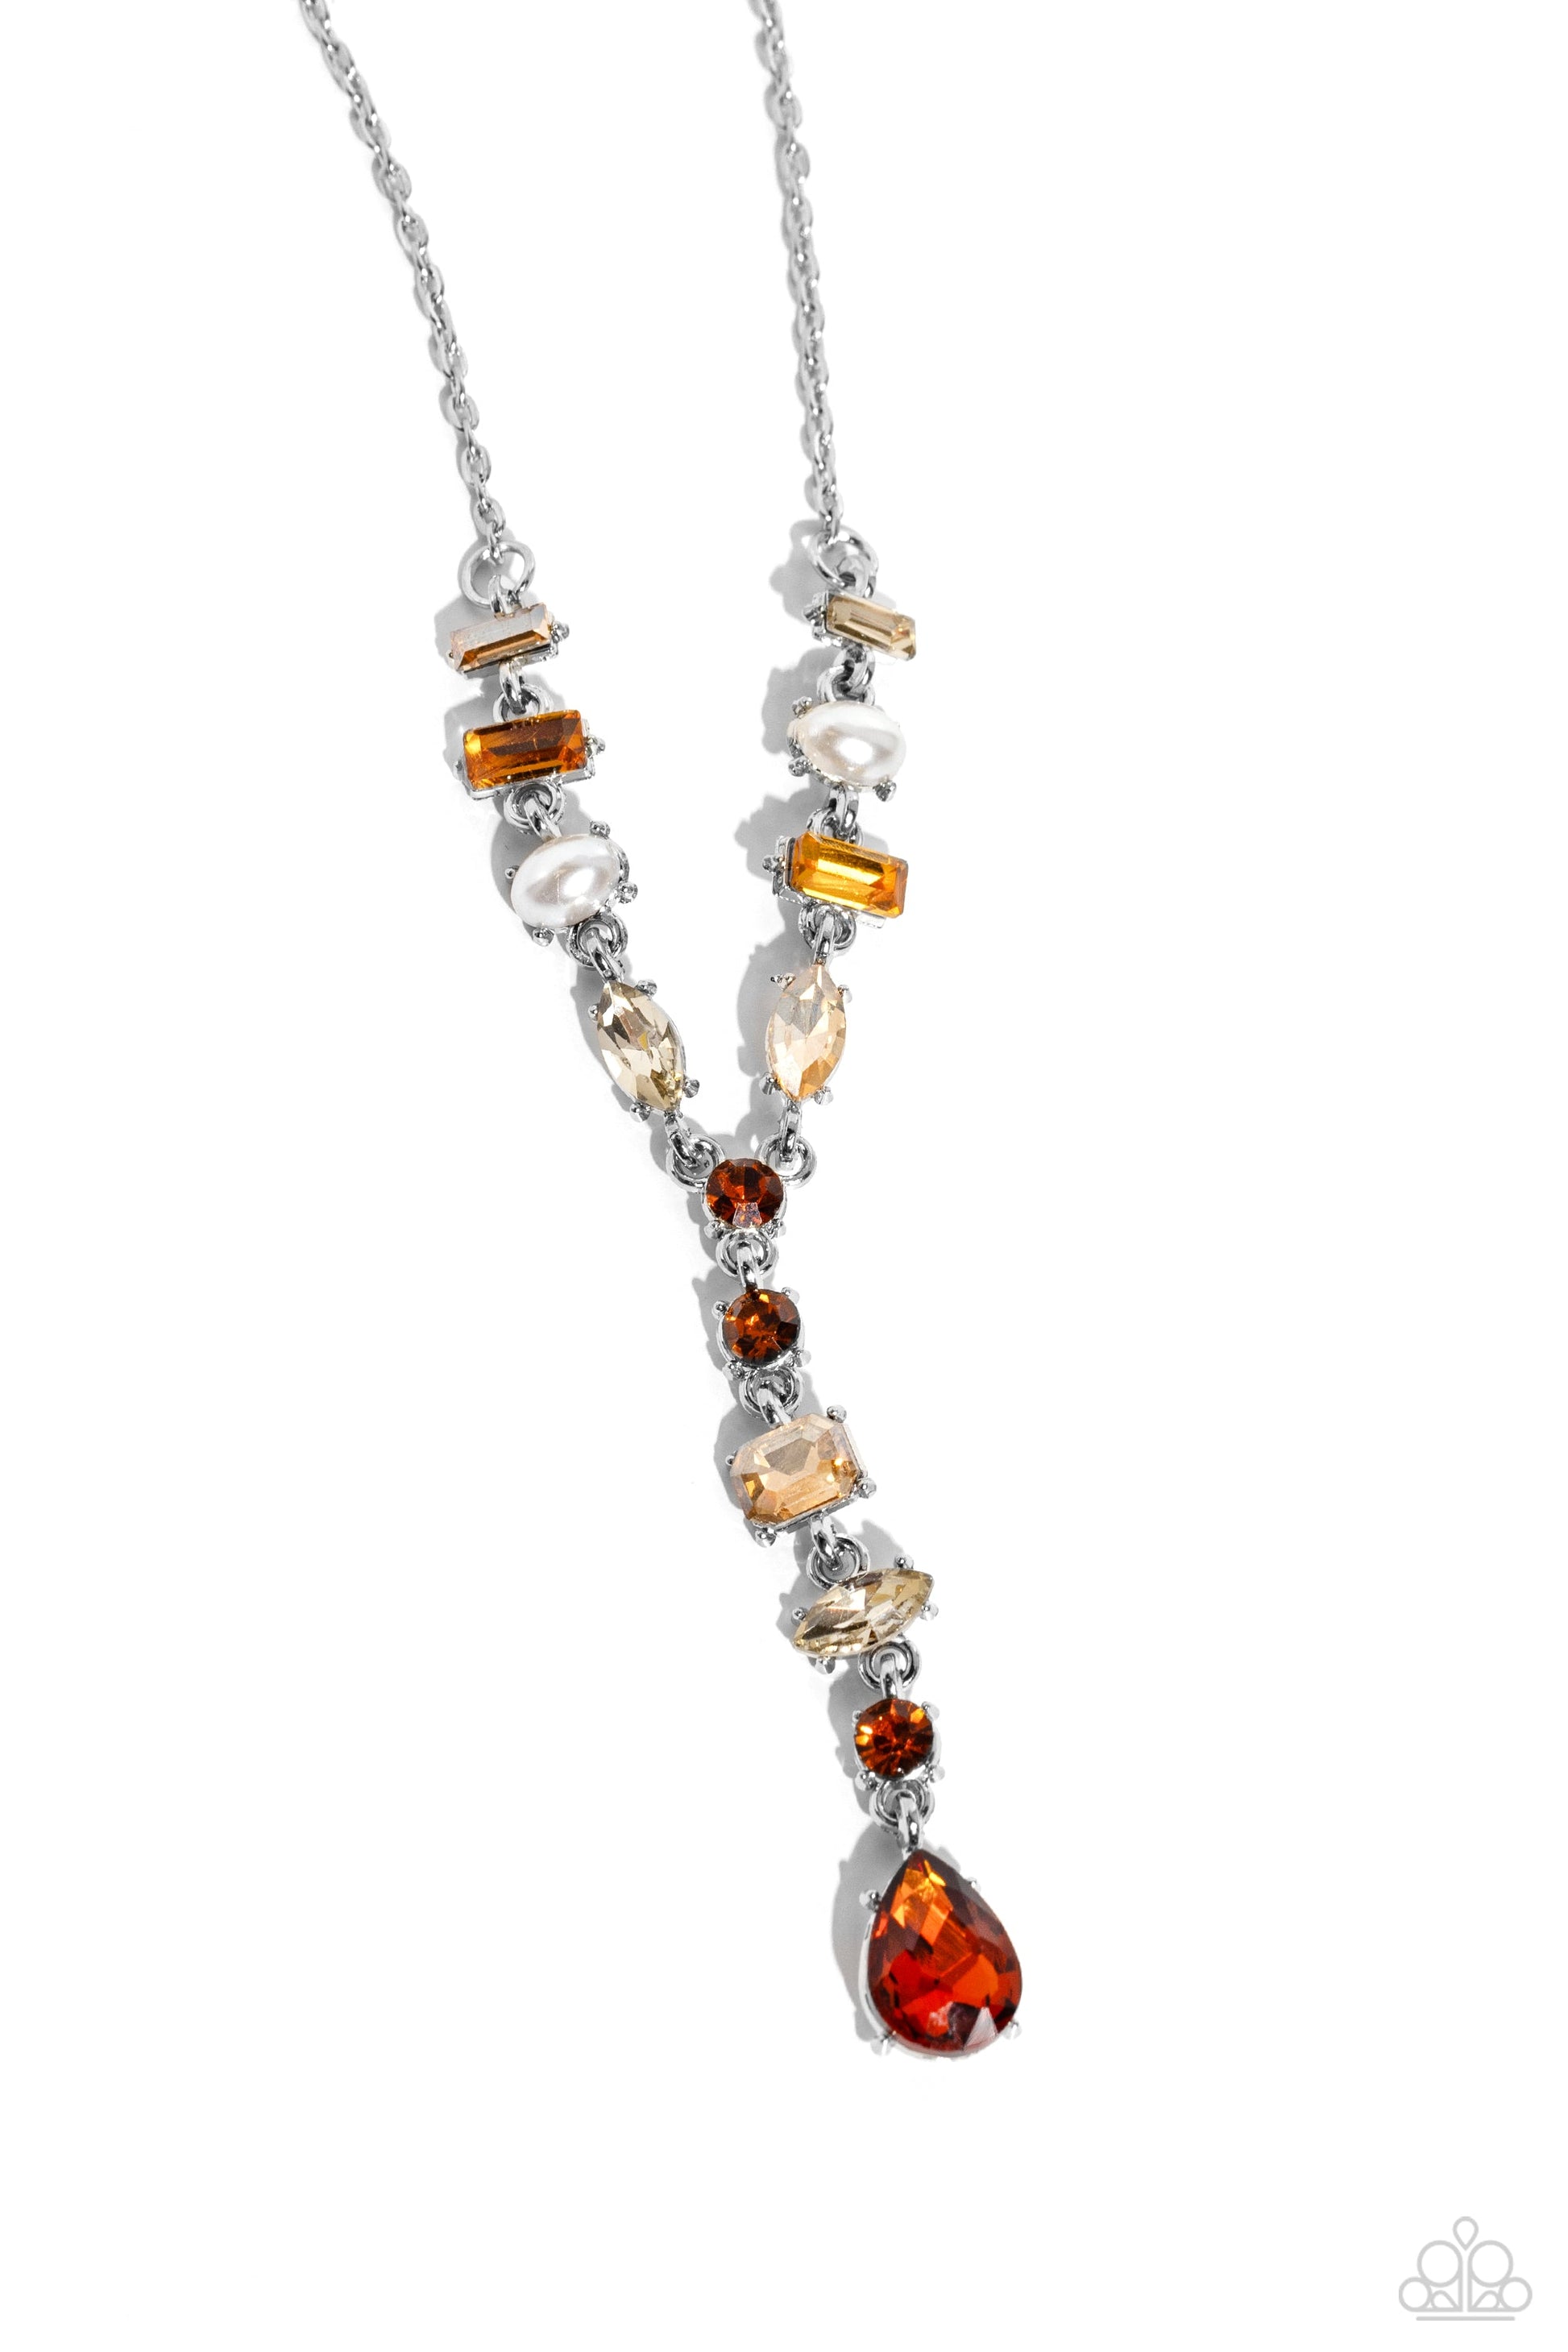 Dreamy Dowry - Topaz Brown Necklace - Paparazzi Accessories - Mismatched polished white pearls and various glassy topaz, light colored topaz, and champagne gems dance along a shimmery dainty silver chain. Matching gems trickle along a single silver chain with an exaggerated topaz gem teardrop at the bottom of the design, creating an extended pendant below the collar.